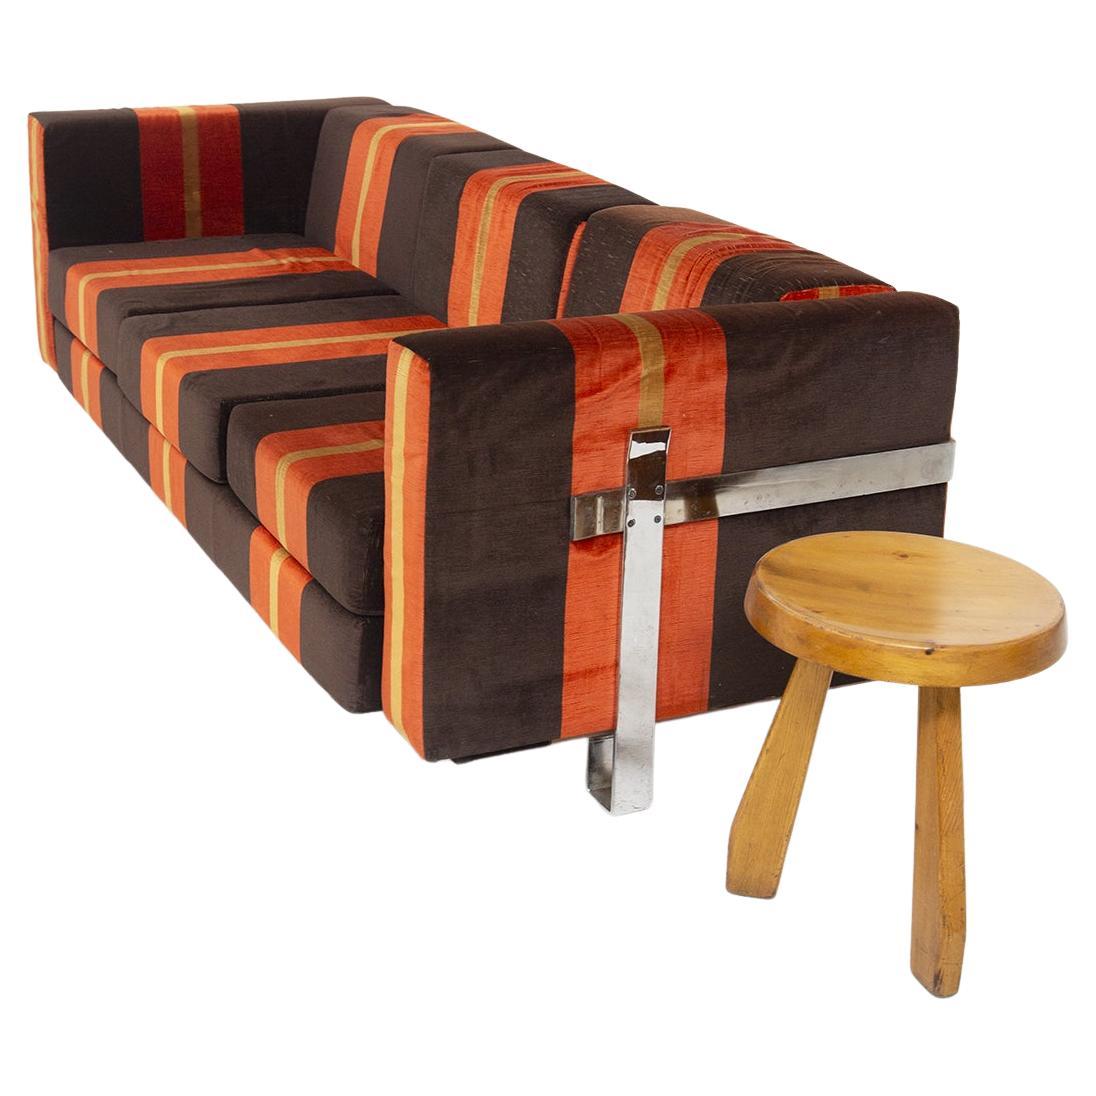 Gorgeous fabric sofa designed by Luigi Caccia Dominioni for the fine manufacturer Azucena Italia.
The vintage sofa is made of brown, orange and yellow striped fabric, which creates a very colorful geometric effect. The lines are very hard and